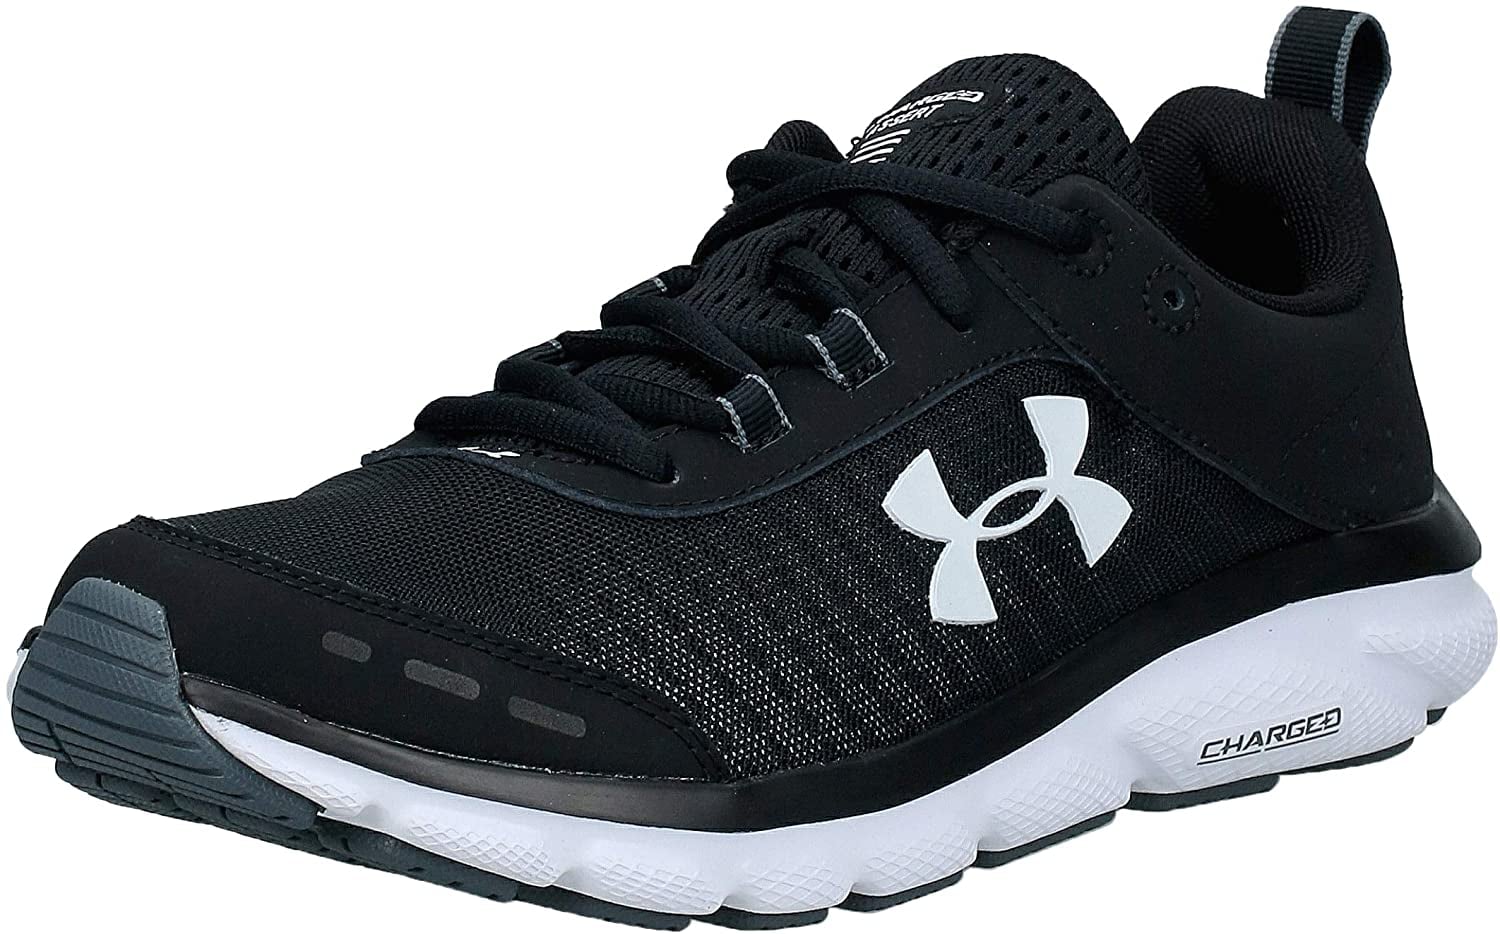 cute under armour shoes